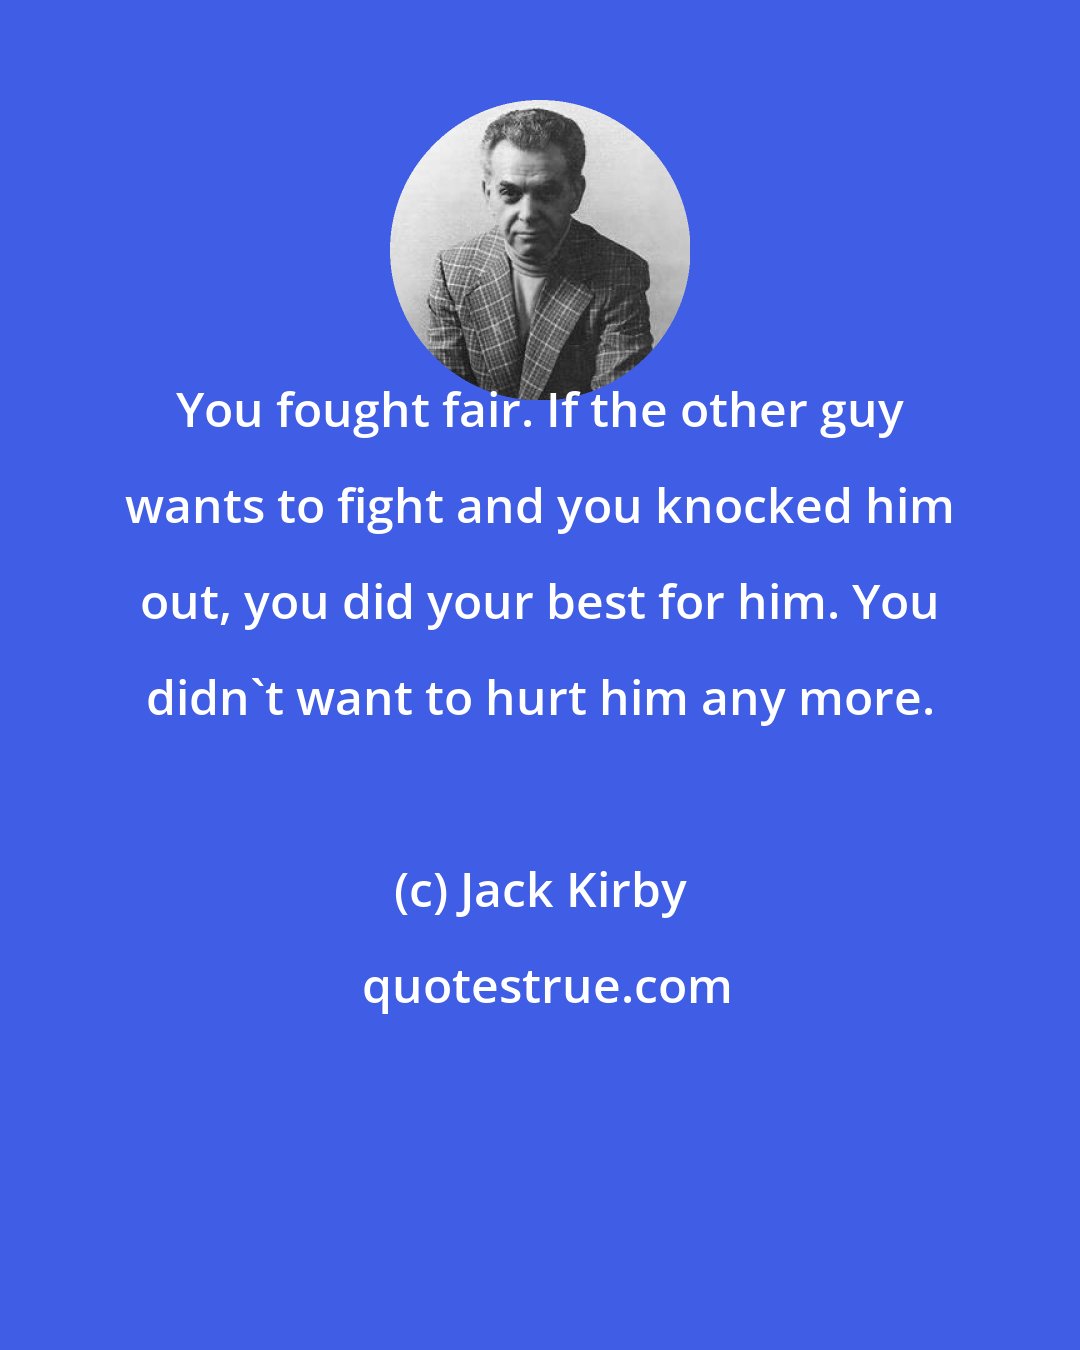 Jack Kirby: You fought fair. If the other guy wants to fight and you knocked him out, you did your best for him. You didn't want to hurt him any more.